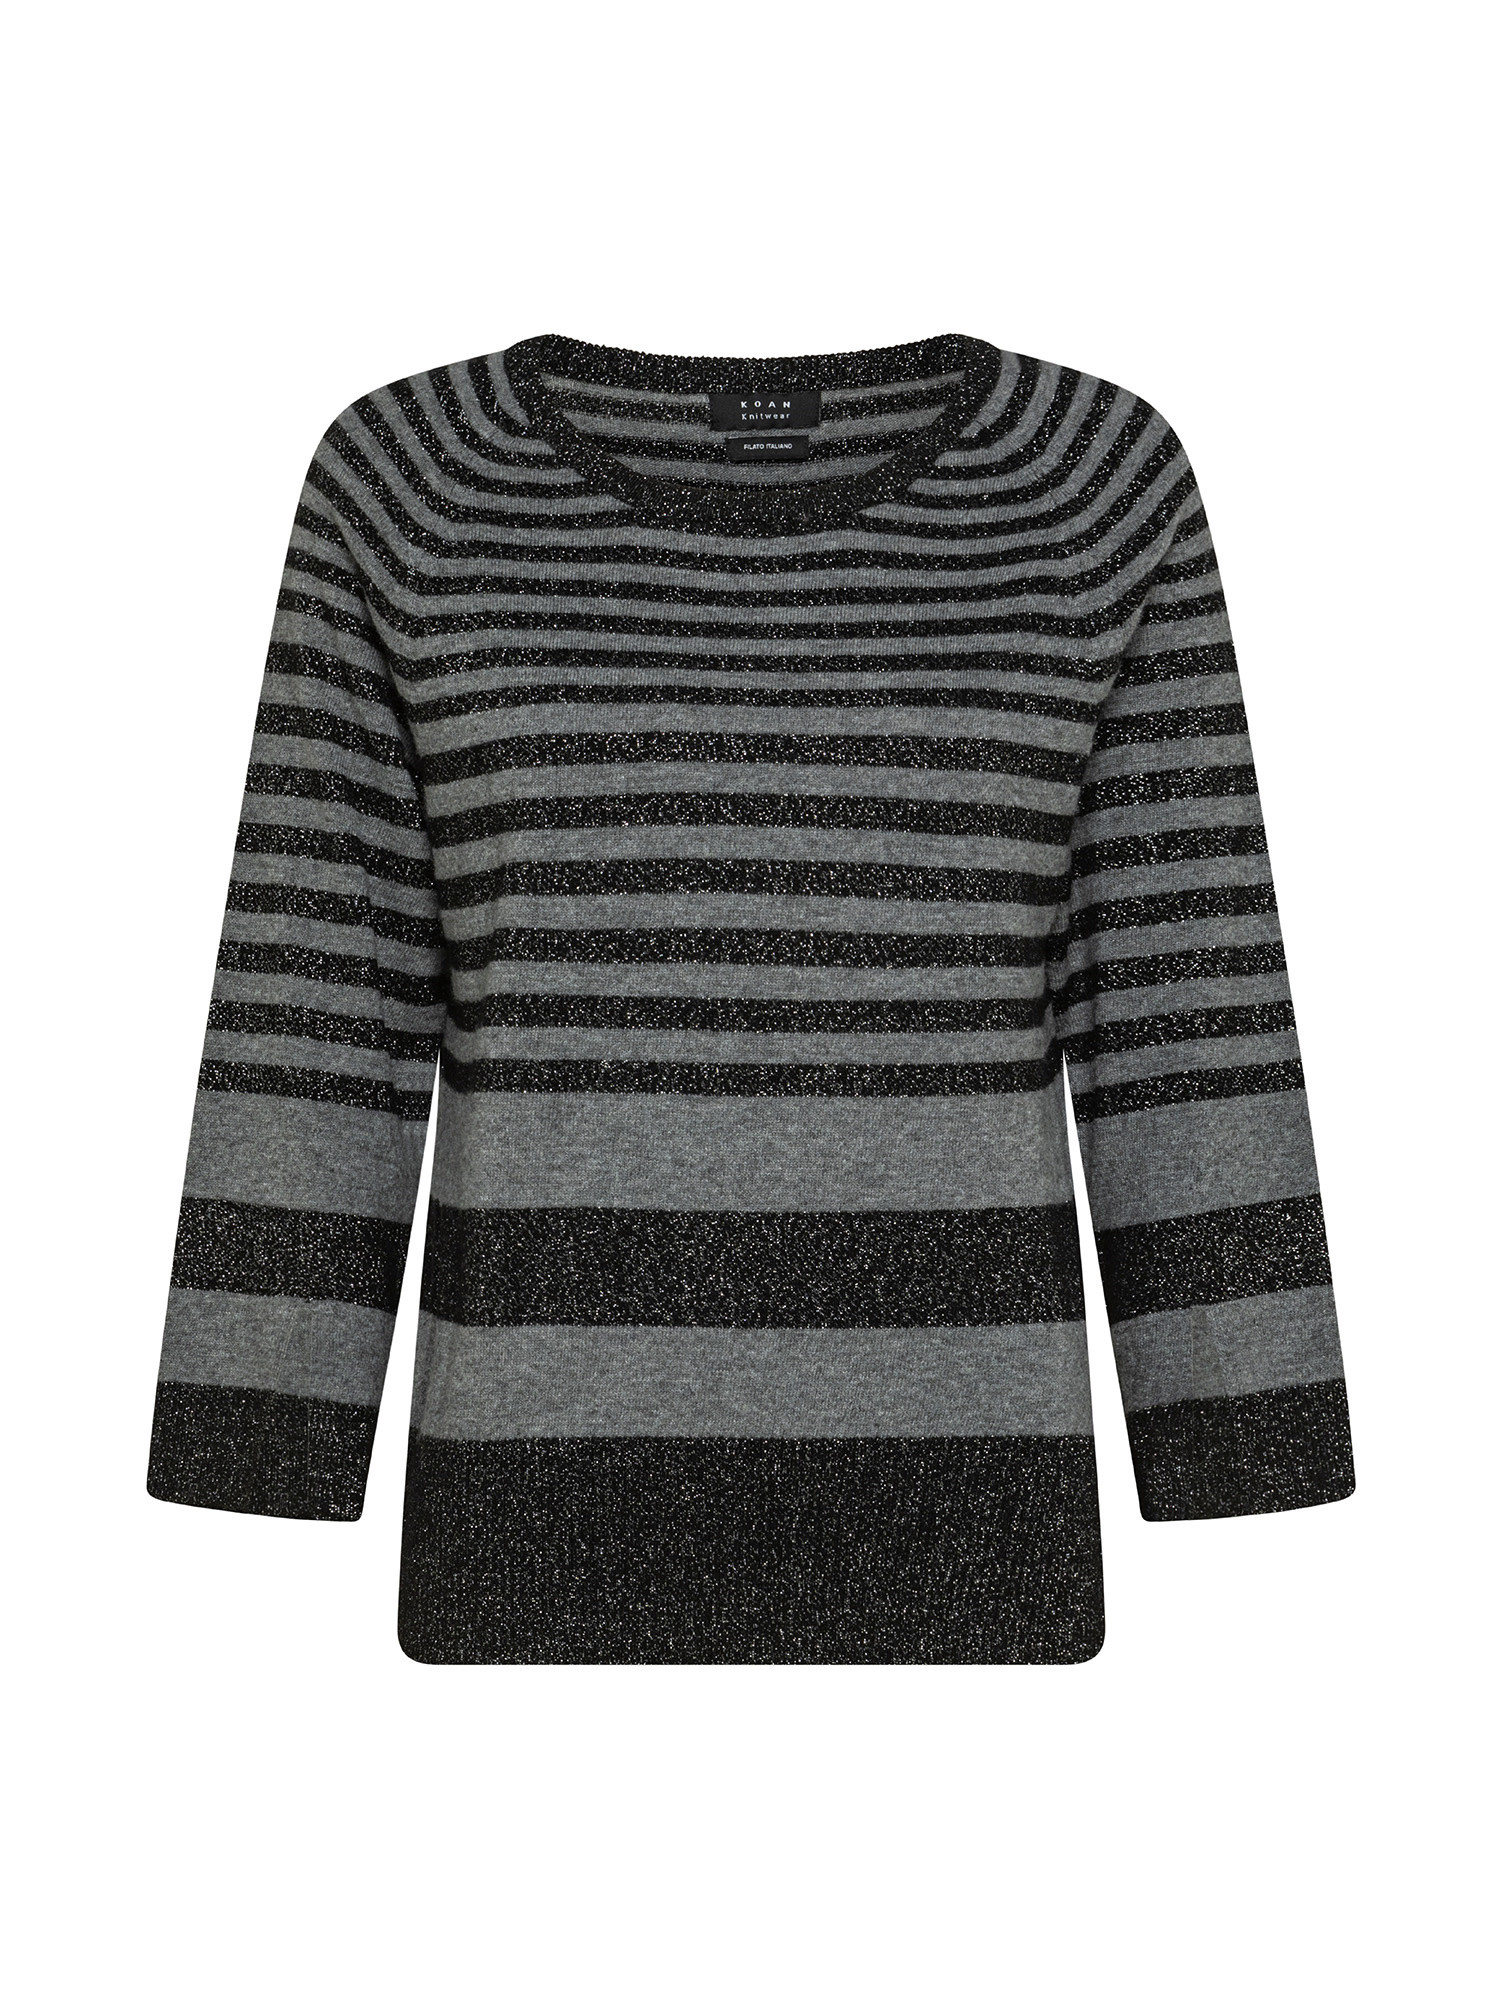 Koan - Striped sweater with slits, Black, large image number 0